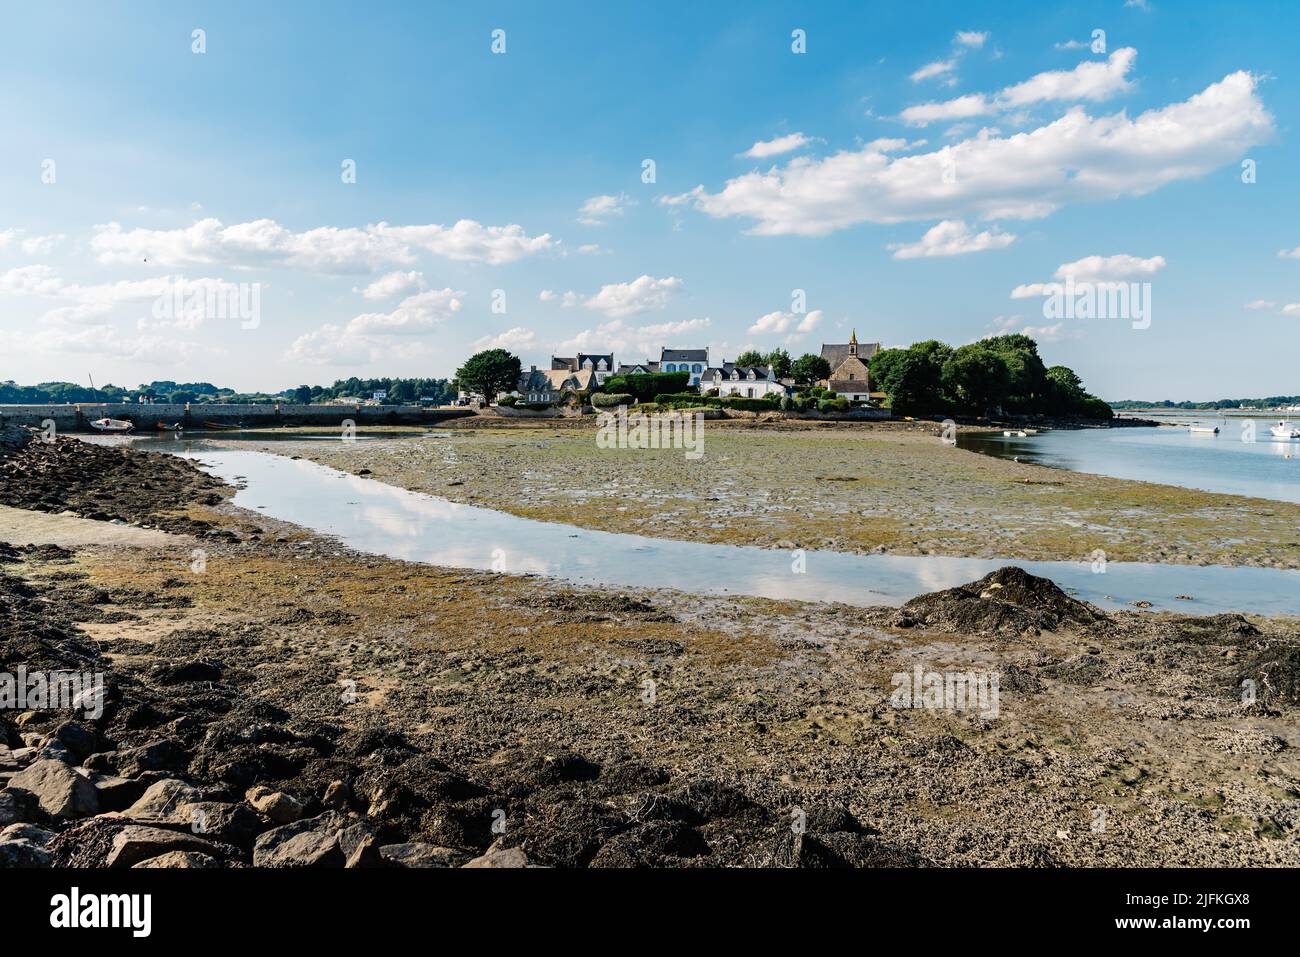 Scenic view of Saint-Cado in Brittany, France. Stock Photo